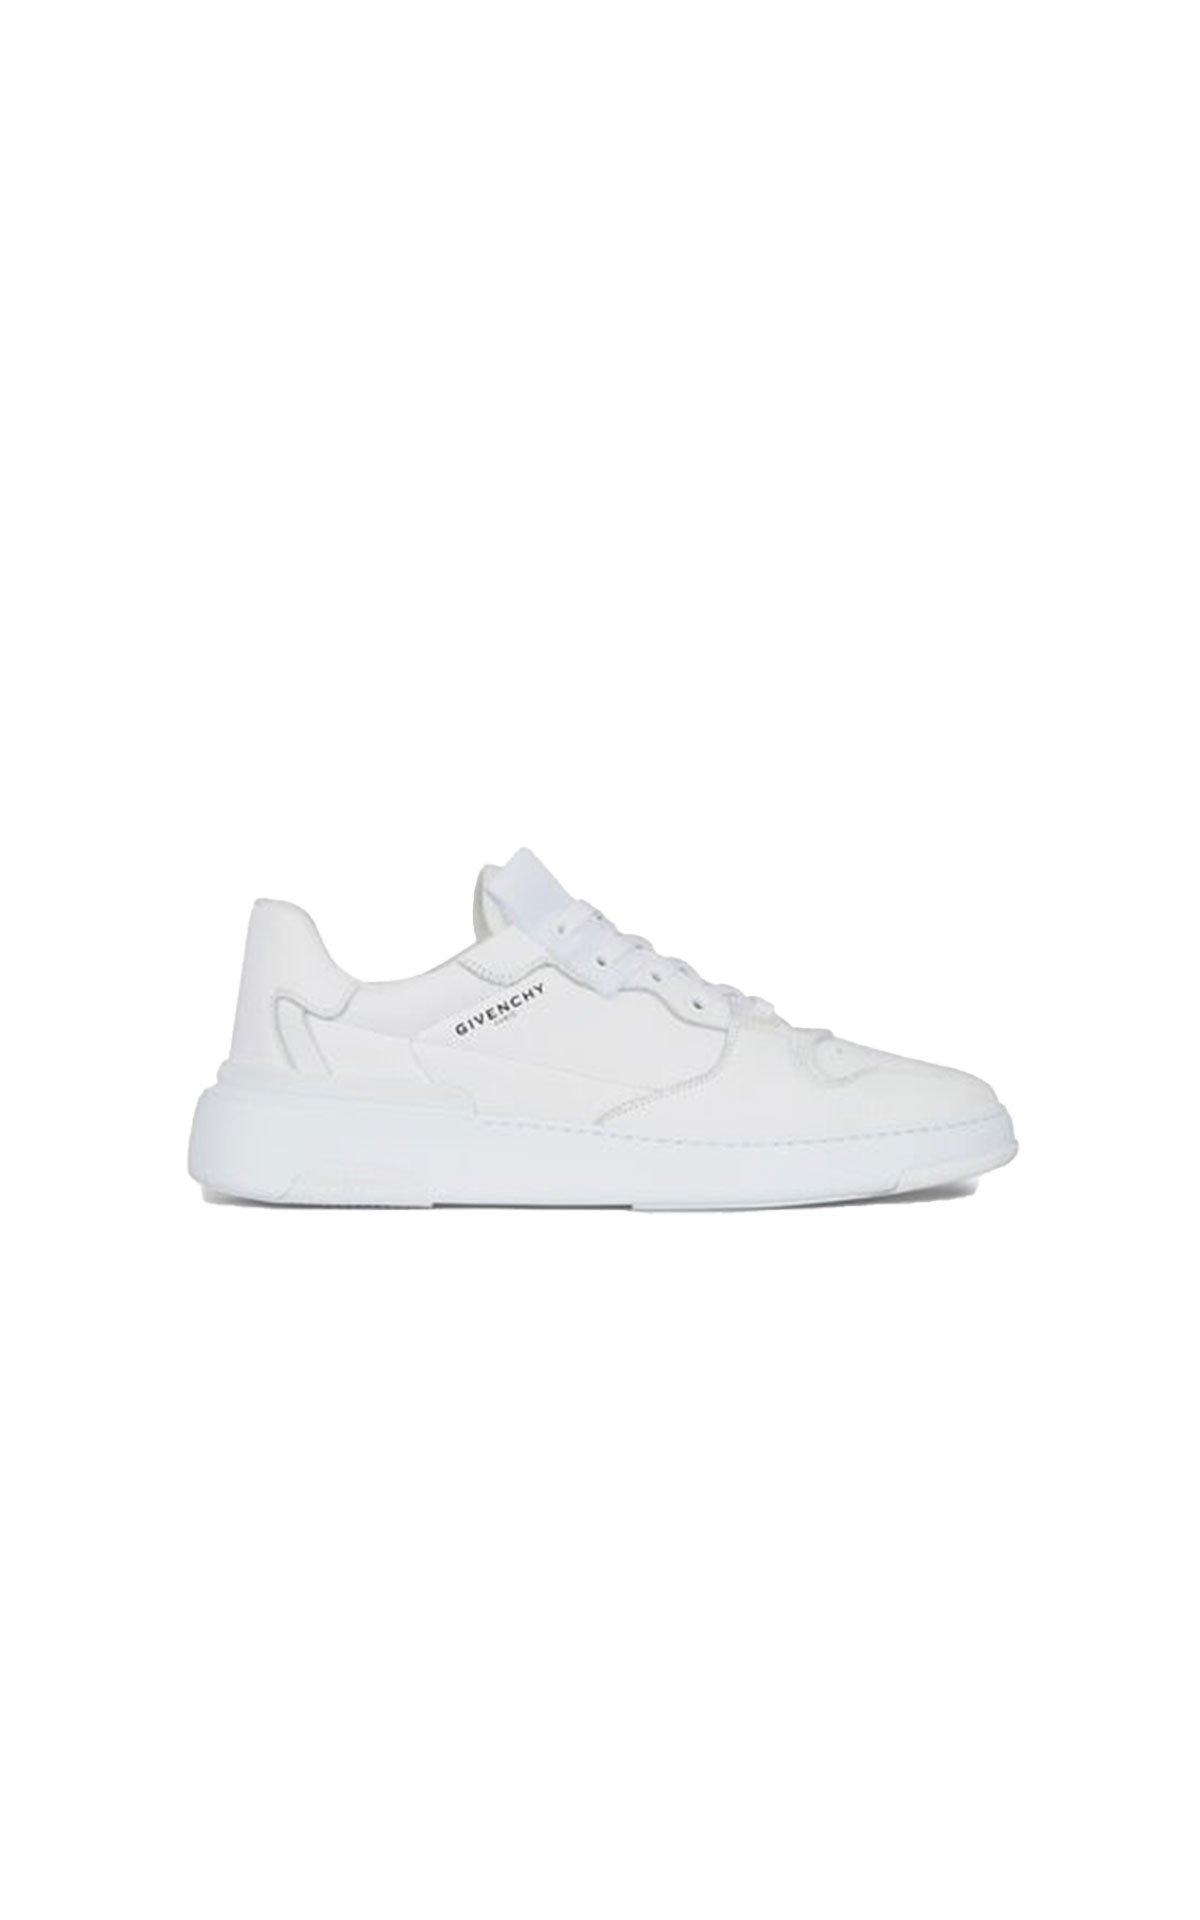 Givenchy Wing low sneaker from Bicester Village